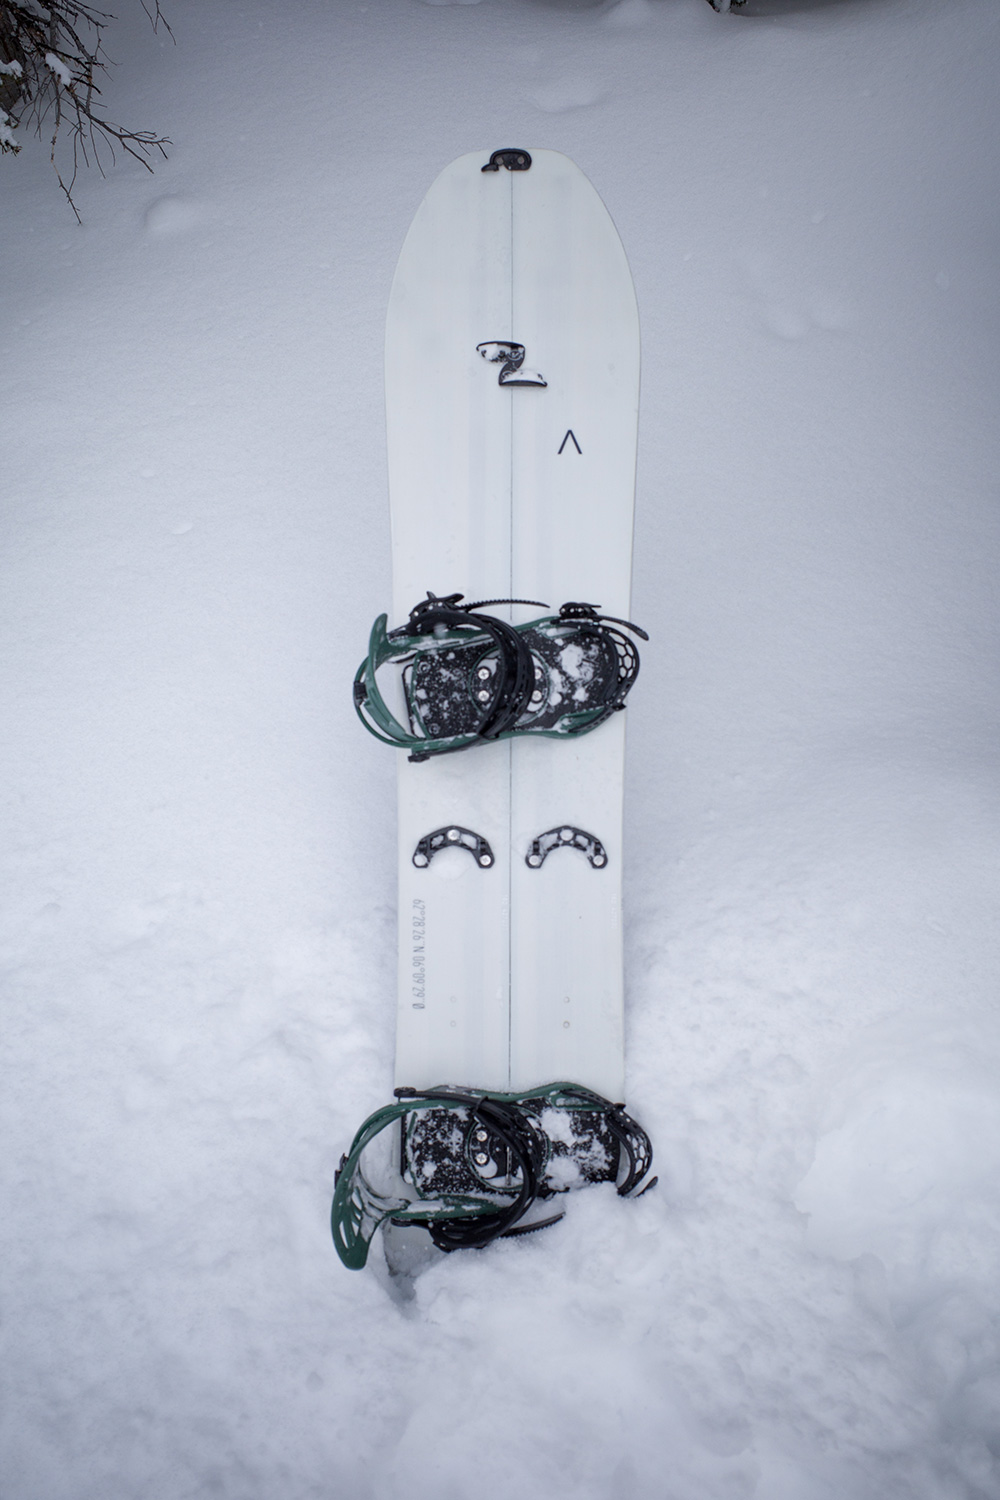 Fjell Snowboards MT1542s Splitboard Review & Test | Field Mag